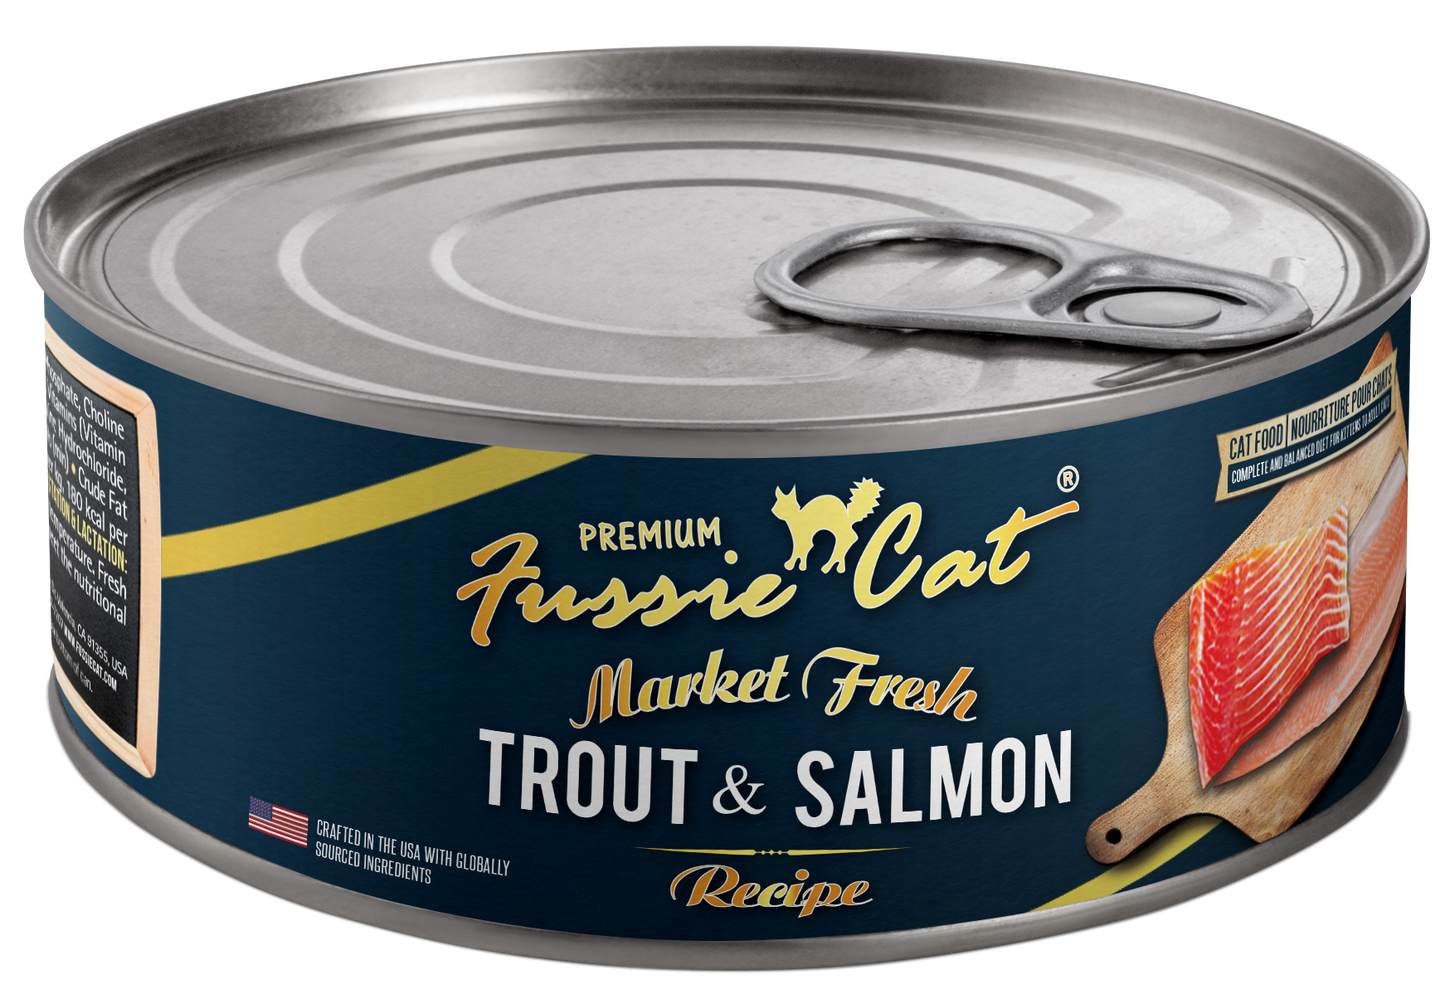 Fussie Cat Market Fresh Trout & Salmon Canned Cat Food